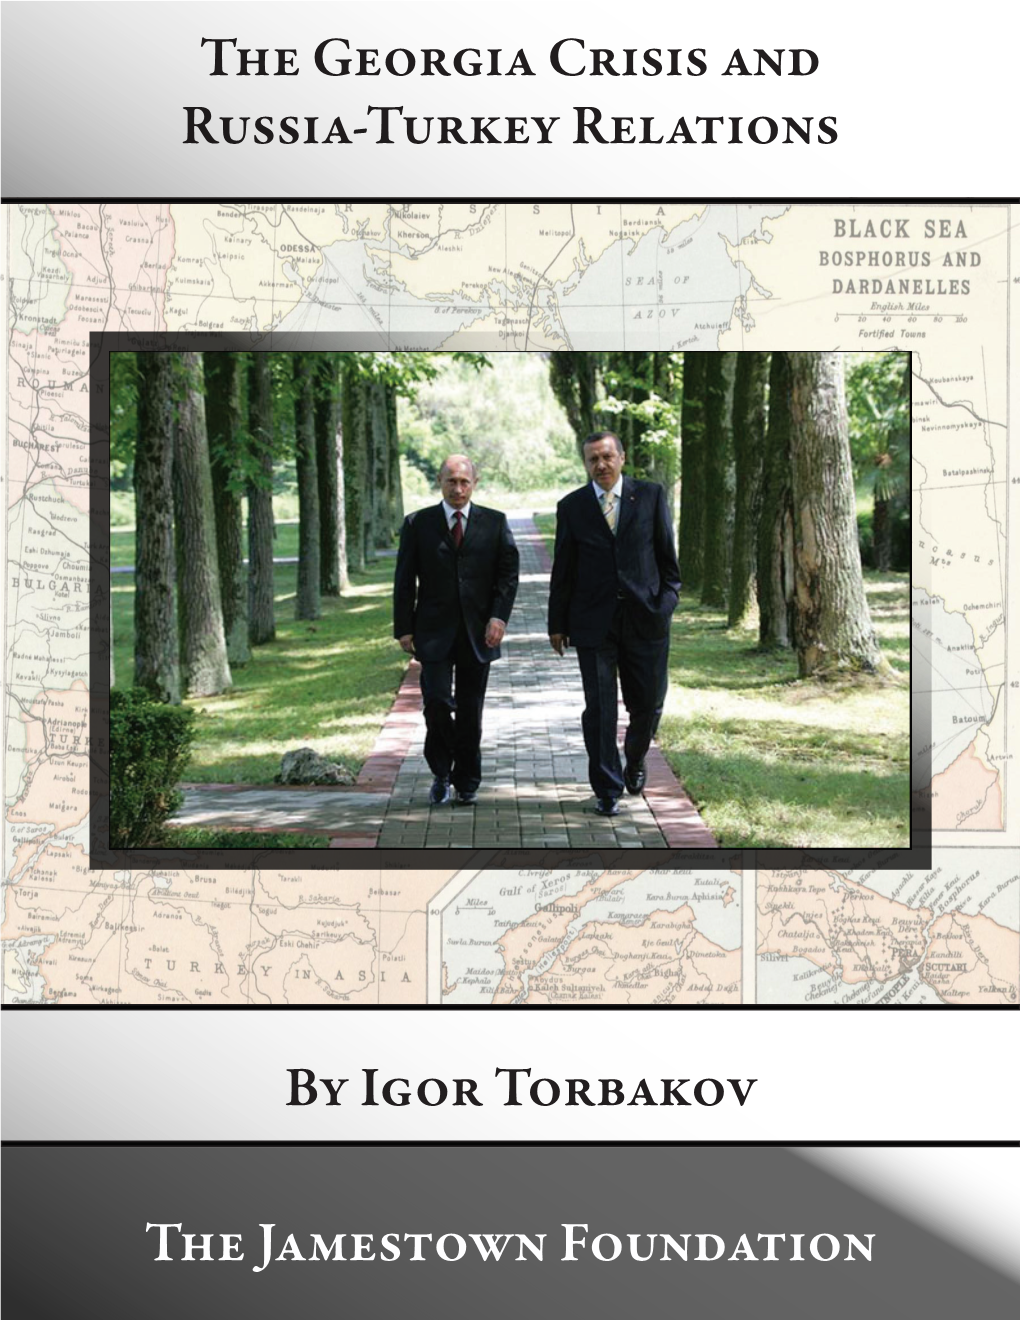 The Georgia Crisis and Russia-Turkey Relations by Igor